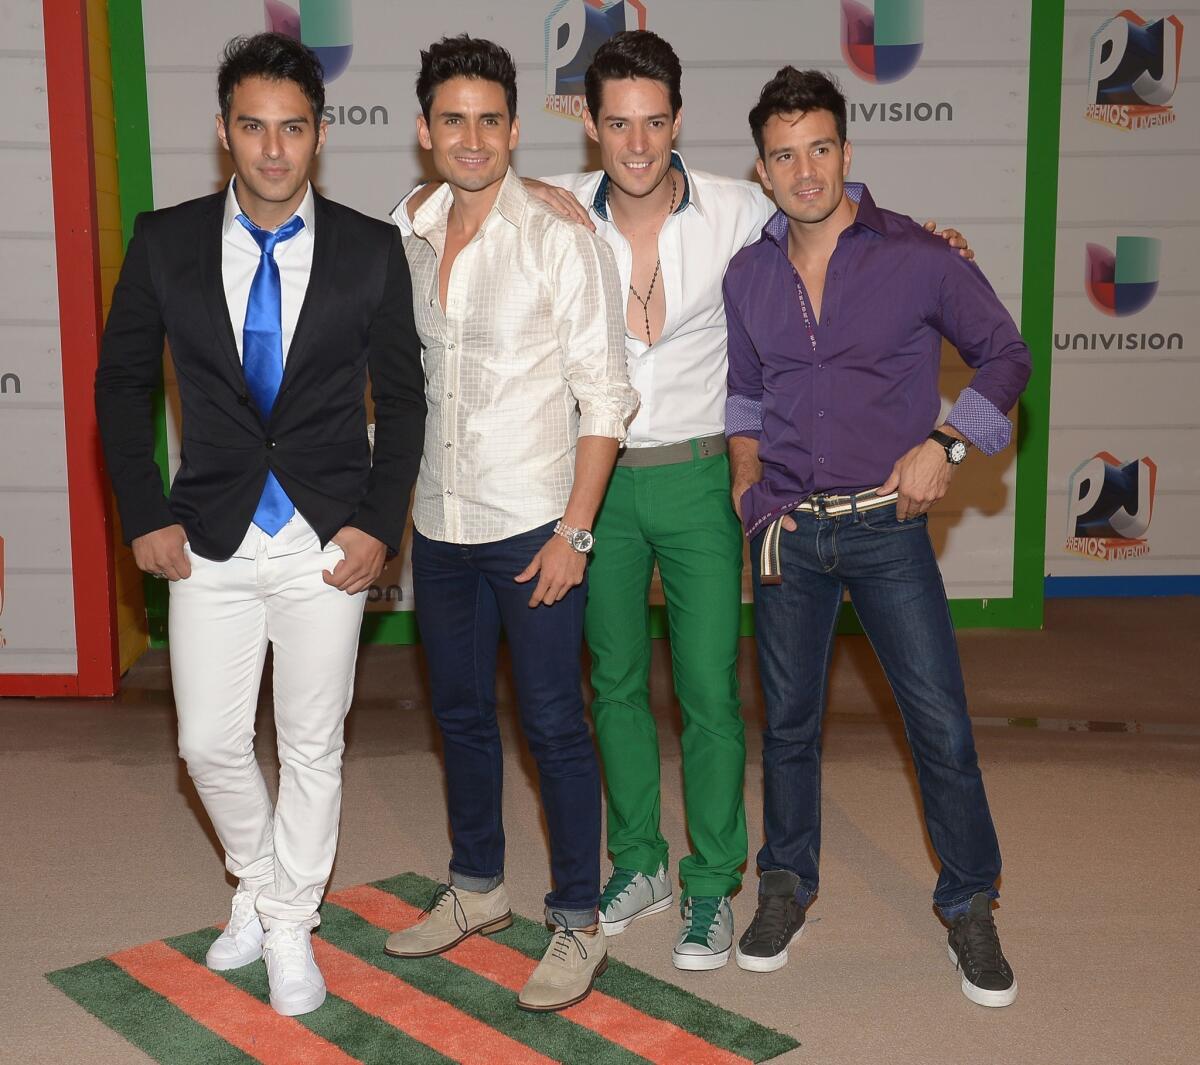 Marconi attends Univision's "Premios Juventud 2013" youth awards show in Miami.